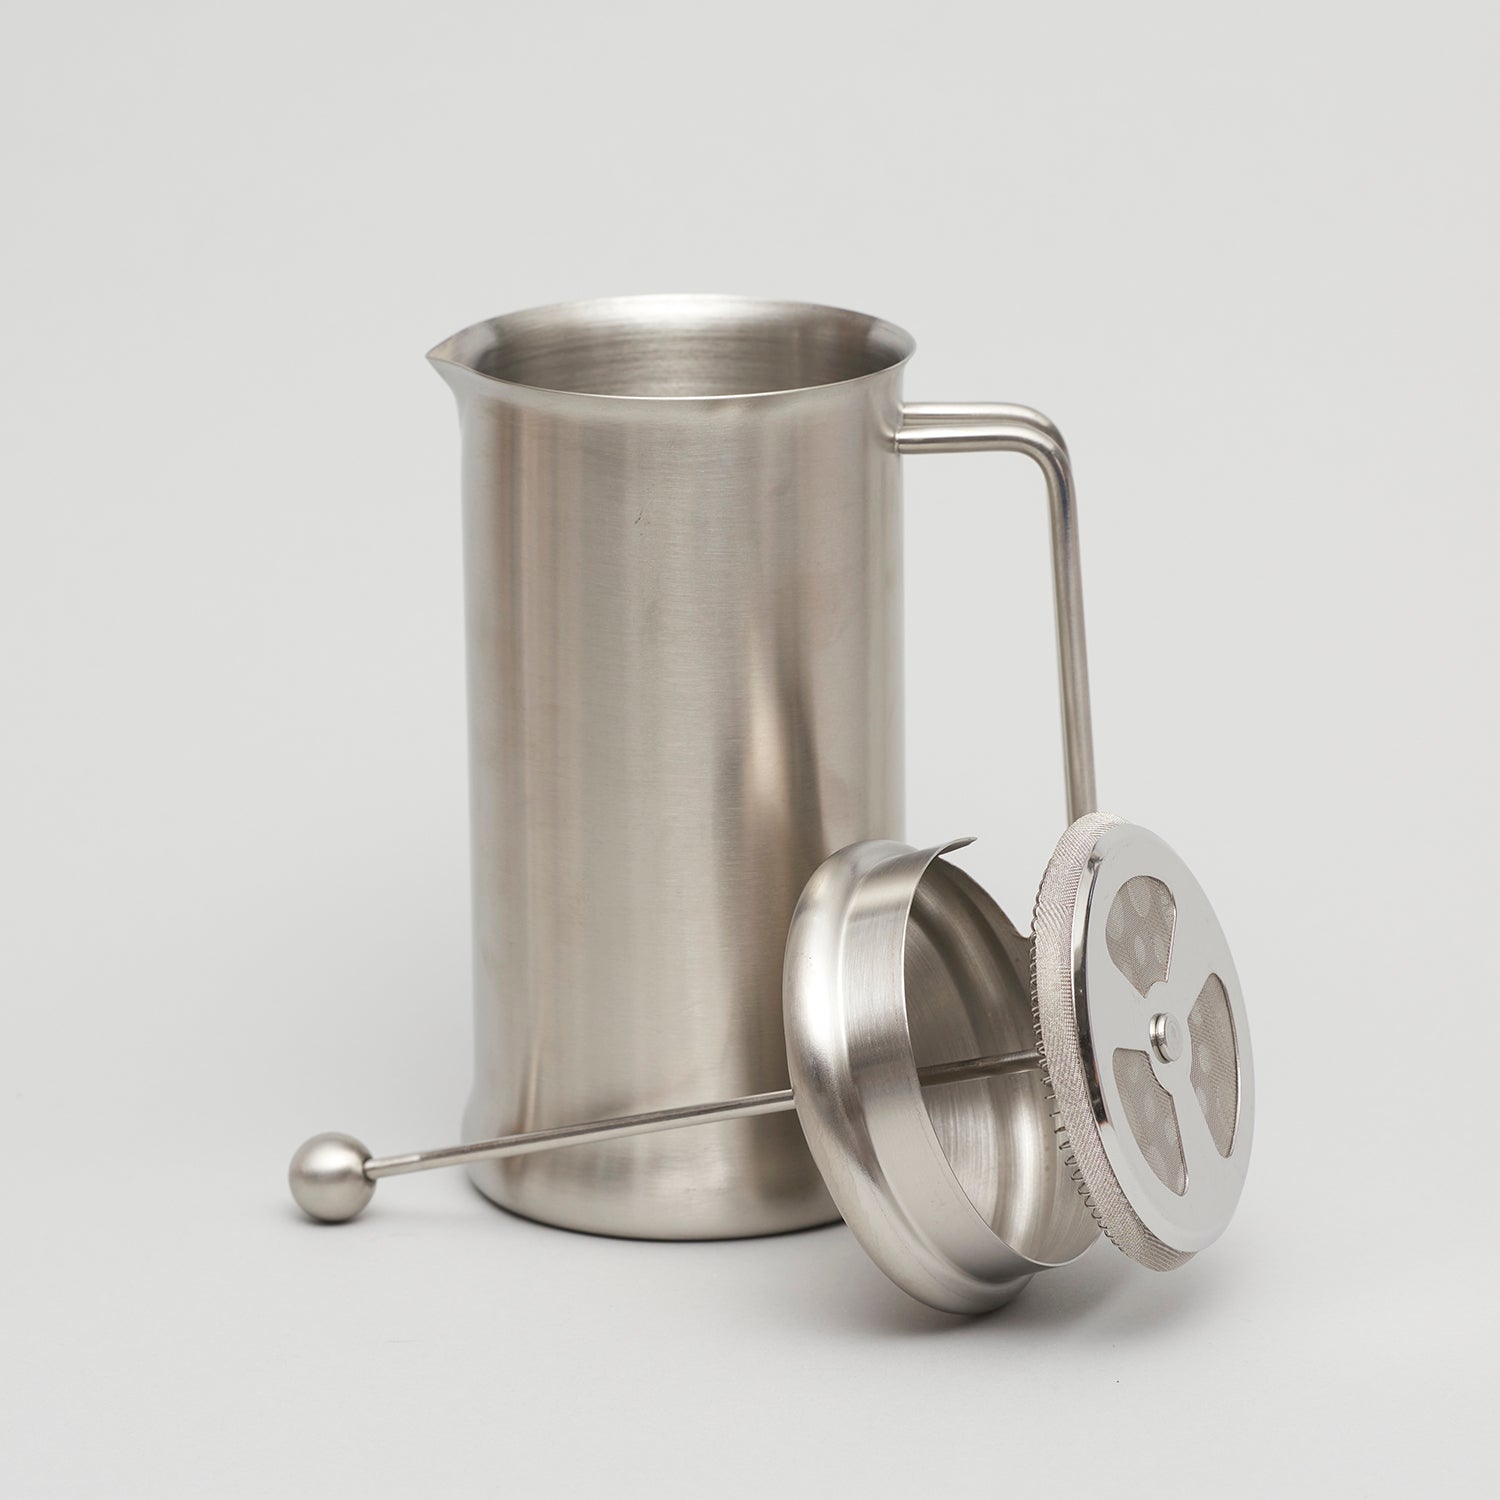 Image shows a stylish brushed stainless steel cafetiere with stainless steel mesh filter.